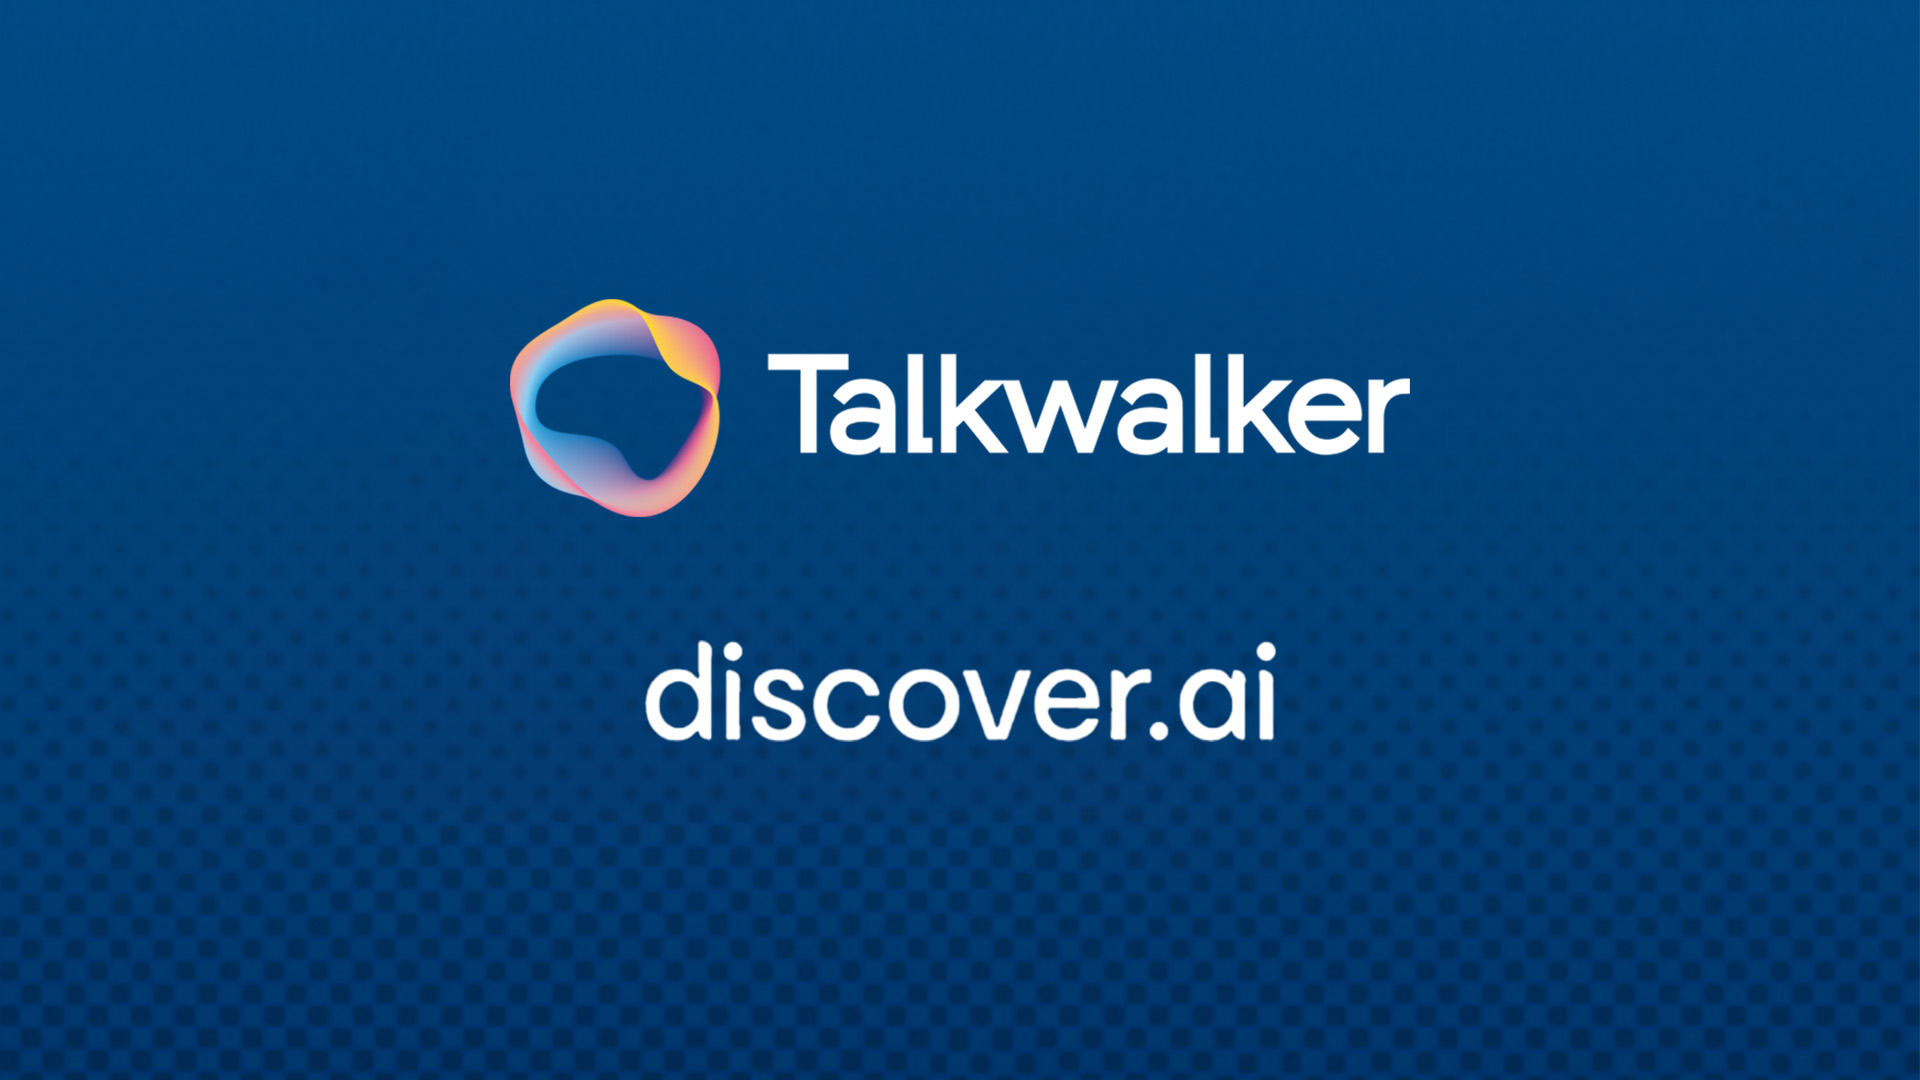 Talkwalker acquires discover.ai to boost its professional services